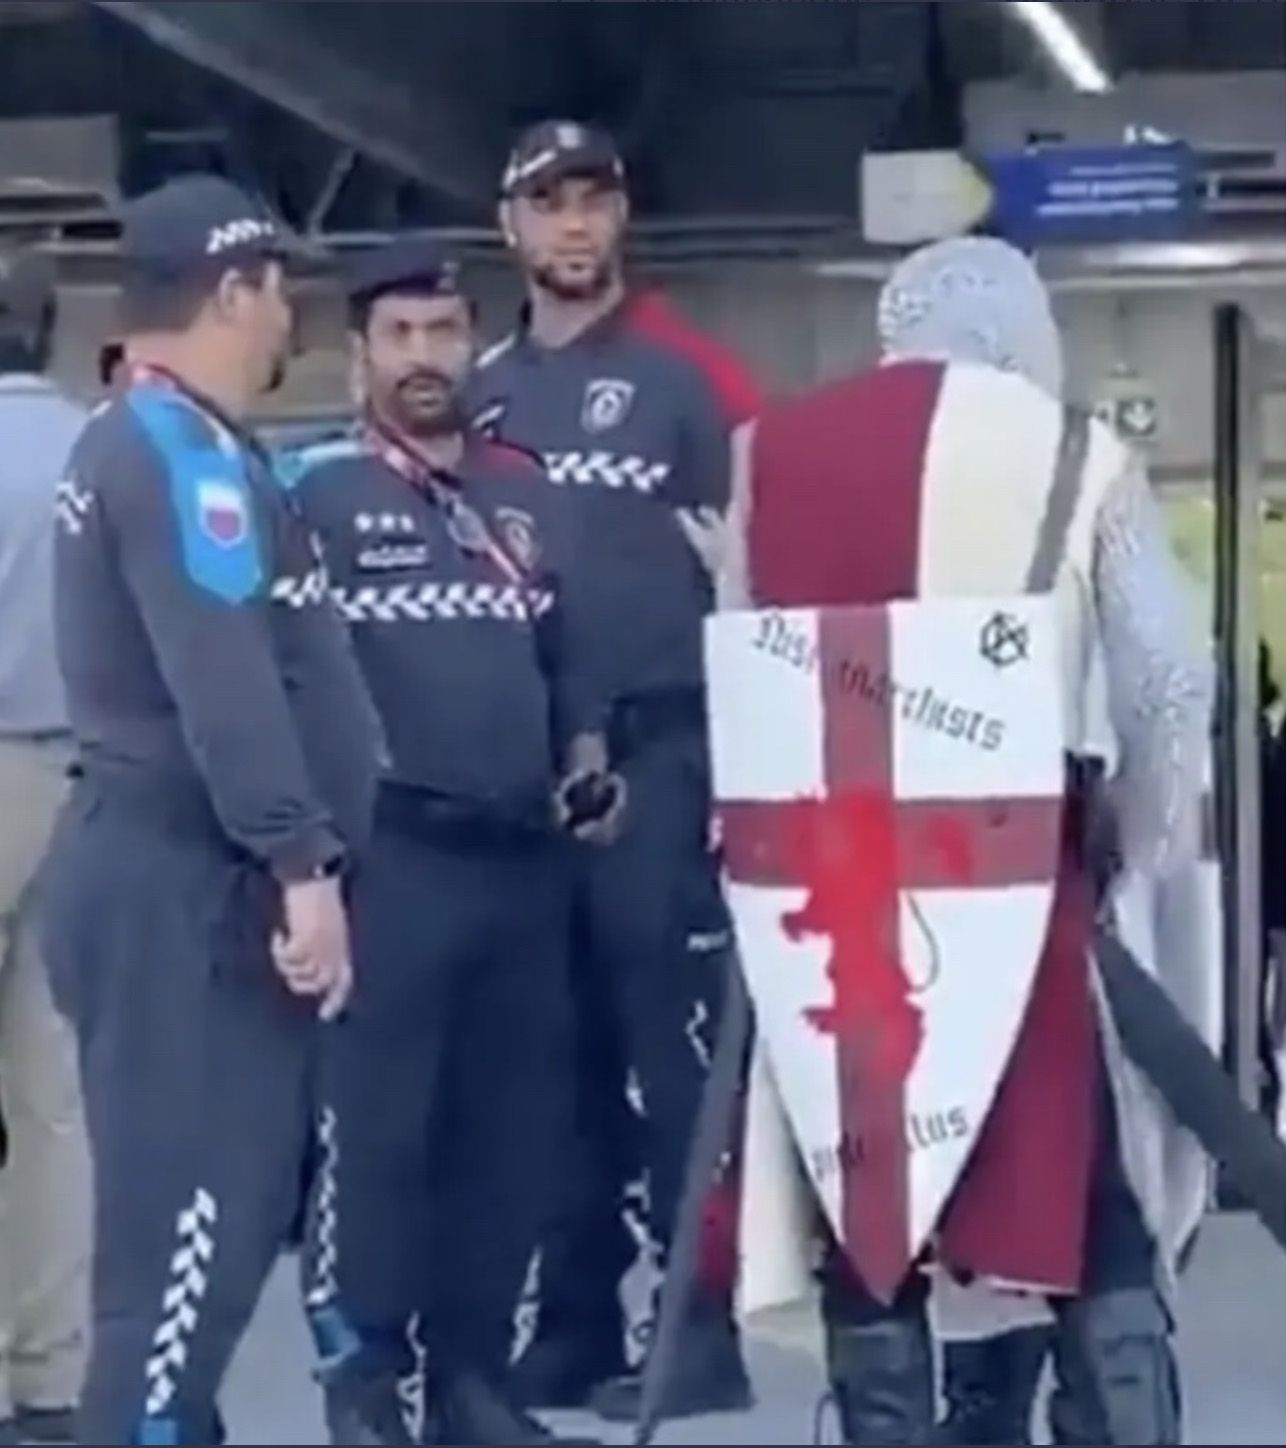 THE SIEGE OF DOHA: An England fan dressed as a Crusader is turned away from a stadium